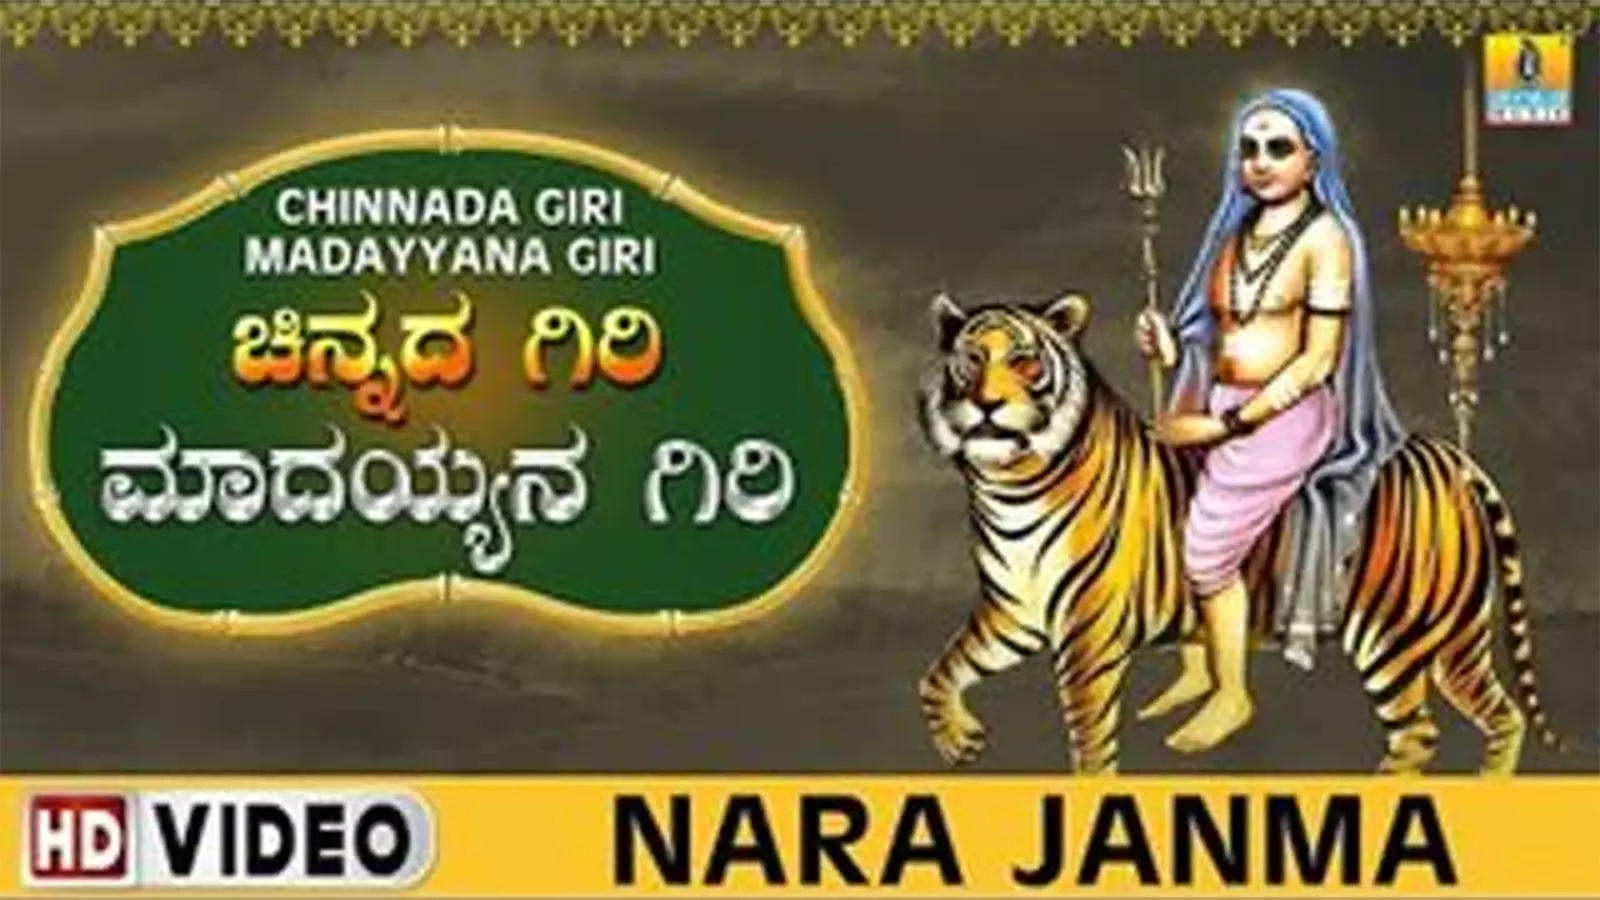 Listen To Popular Kannada Devotional Video Song 'Nara Janma' Sung By S.   | Lifestyle - Times of India Videos